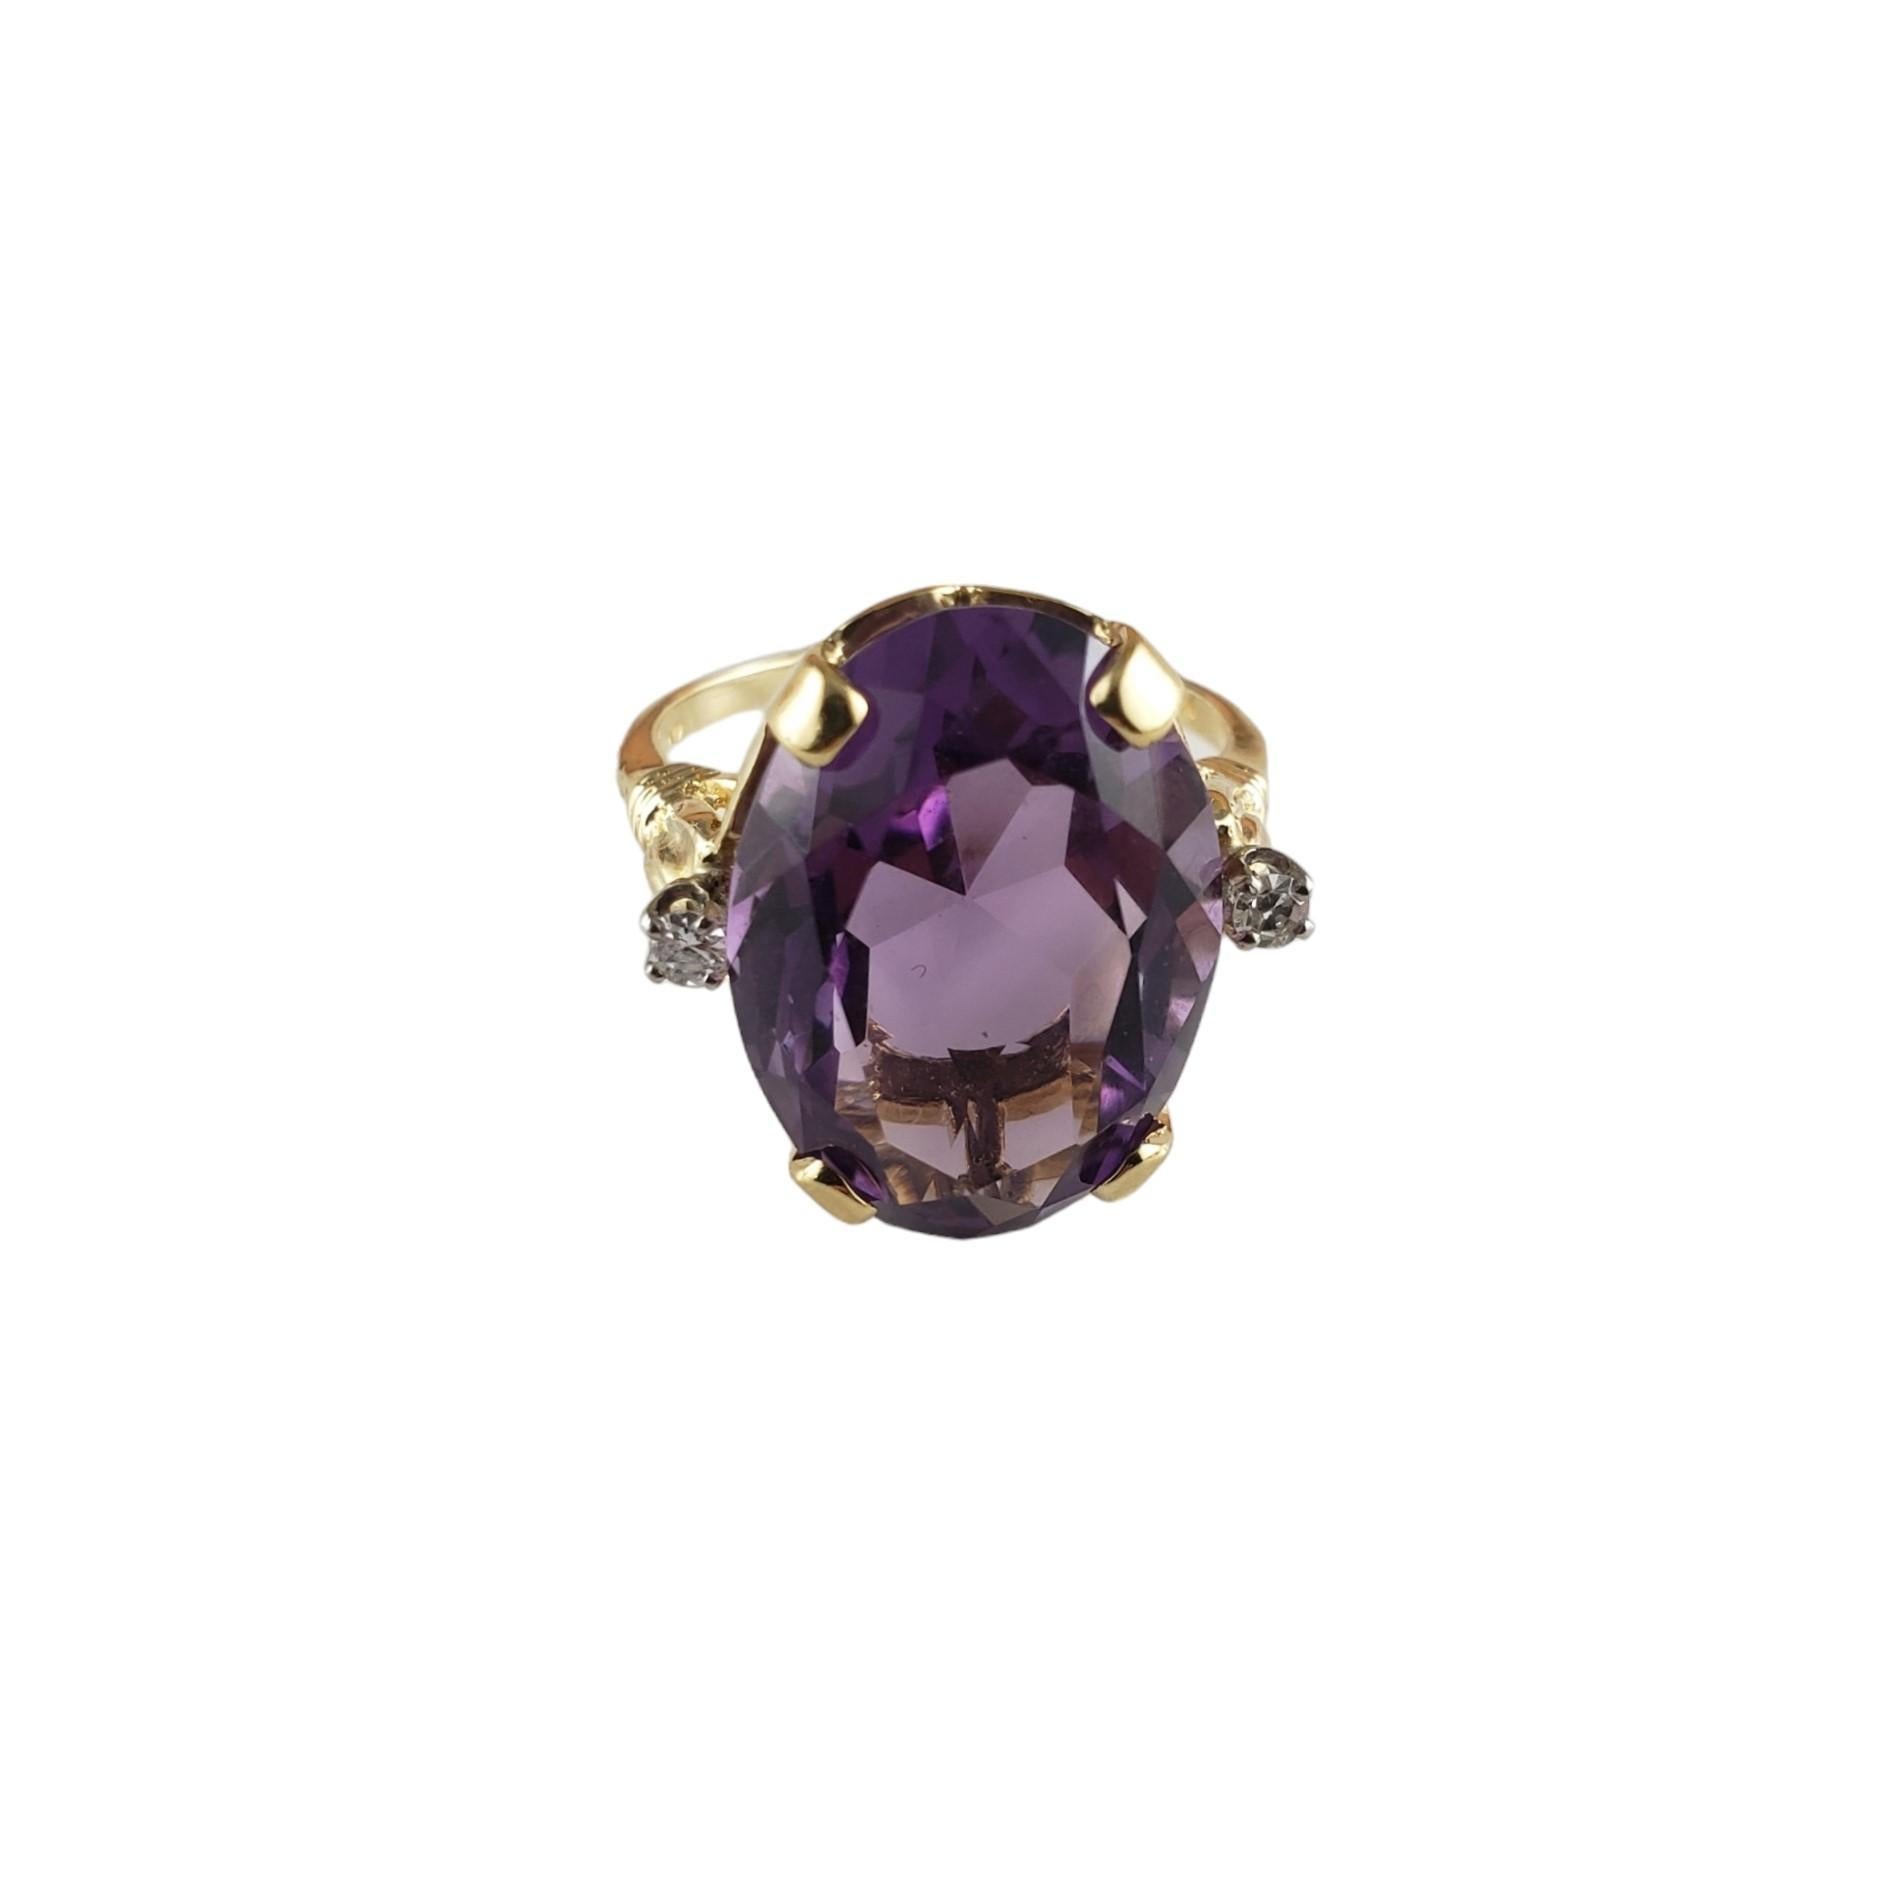 Vintage 14K Yellow Gold Amethyst and Diamond Ring Size 7 Lab Certified-

This lovely ring features one oval amethyst stone (17.8 mm x 13.9 mm) and two round single cut diamonds set in classic 14K yellow gold.  

Amethyst weight: 11.5 ct.

Total